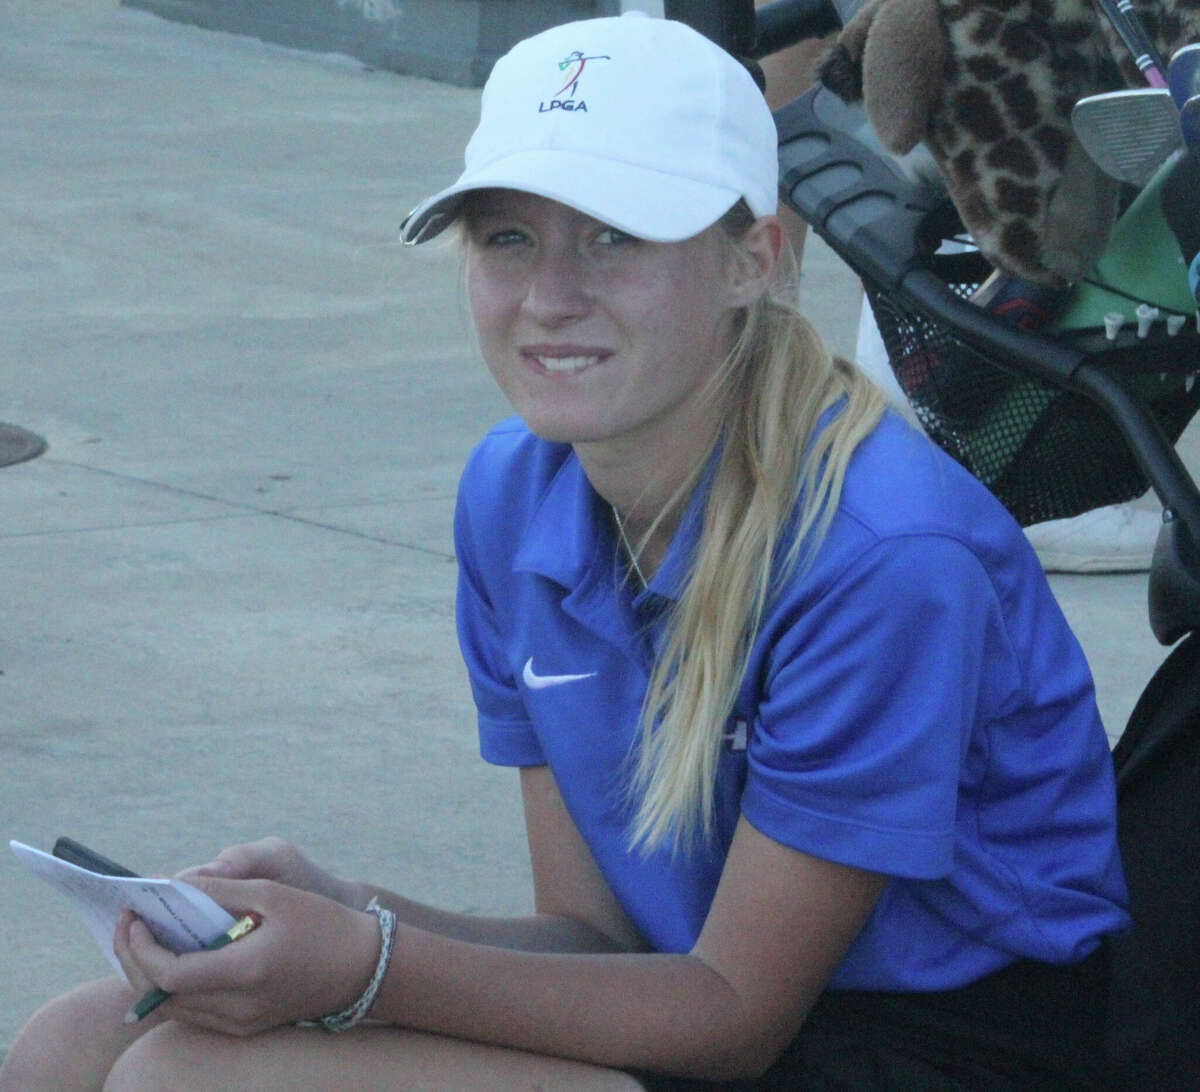 Chippewa Hills' Madison Allen shot an 86 on Friday at the Lady Cardinal Invitational.